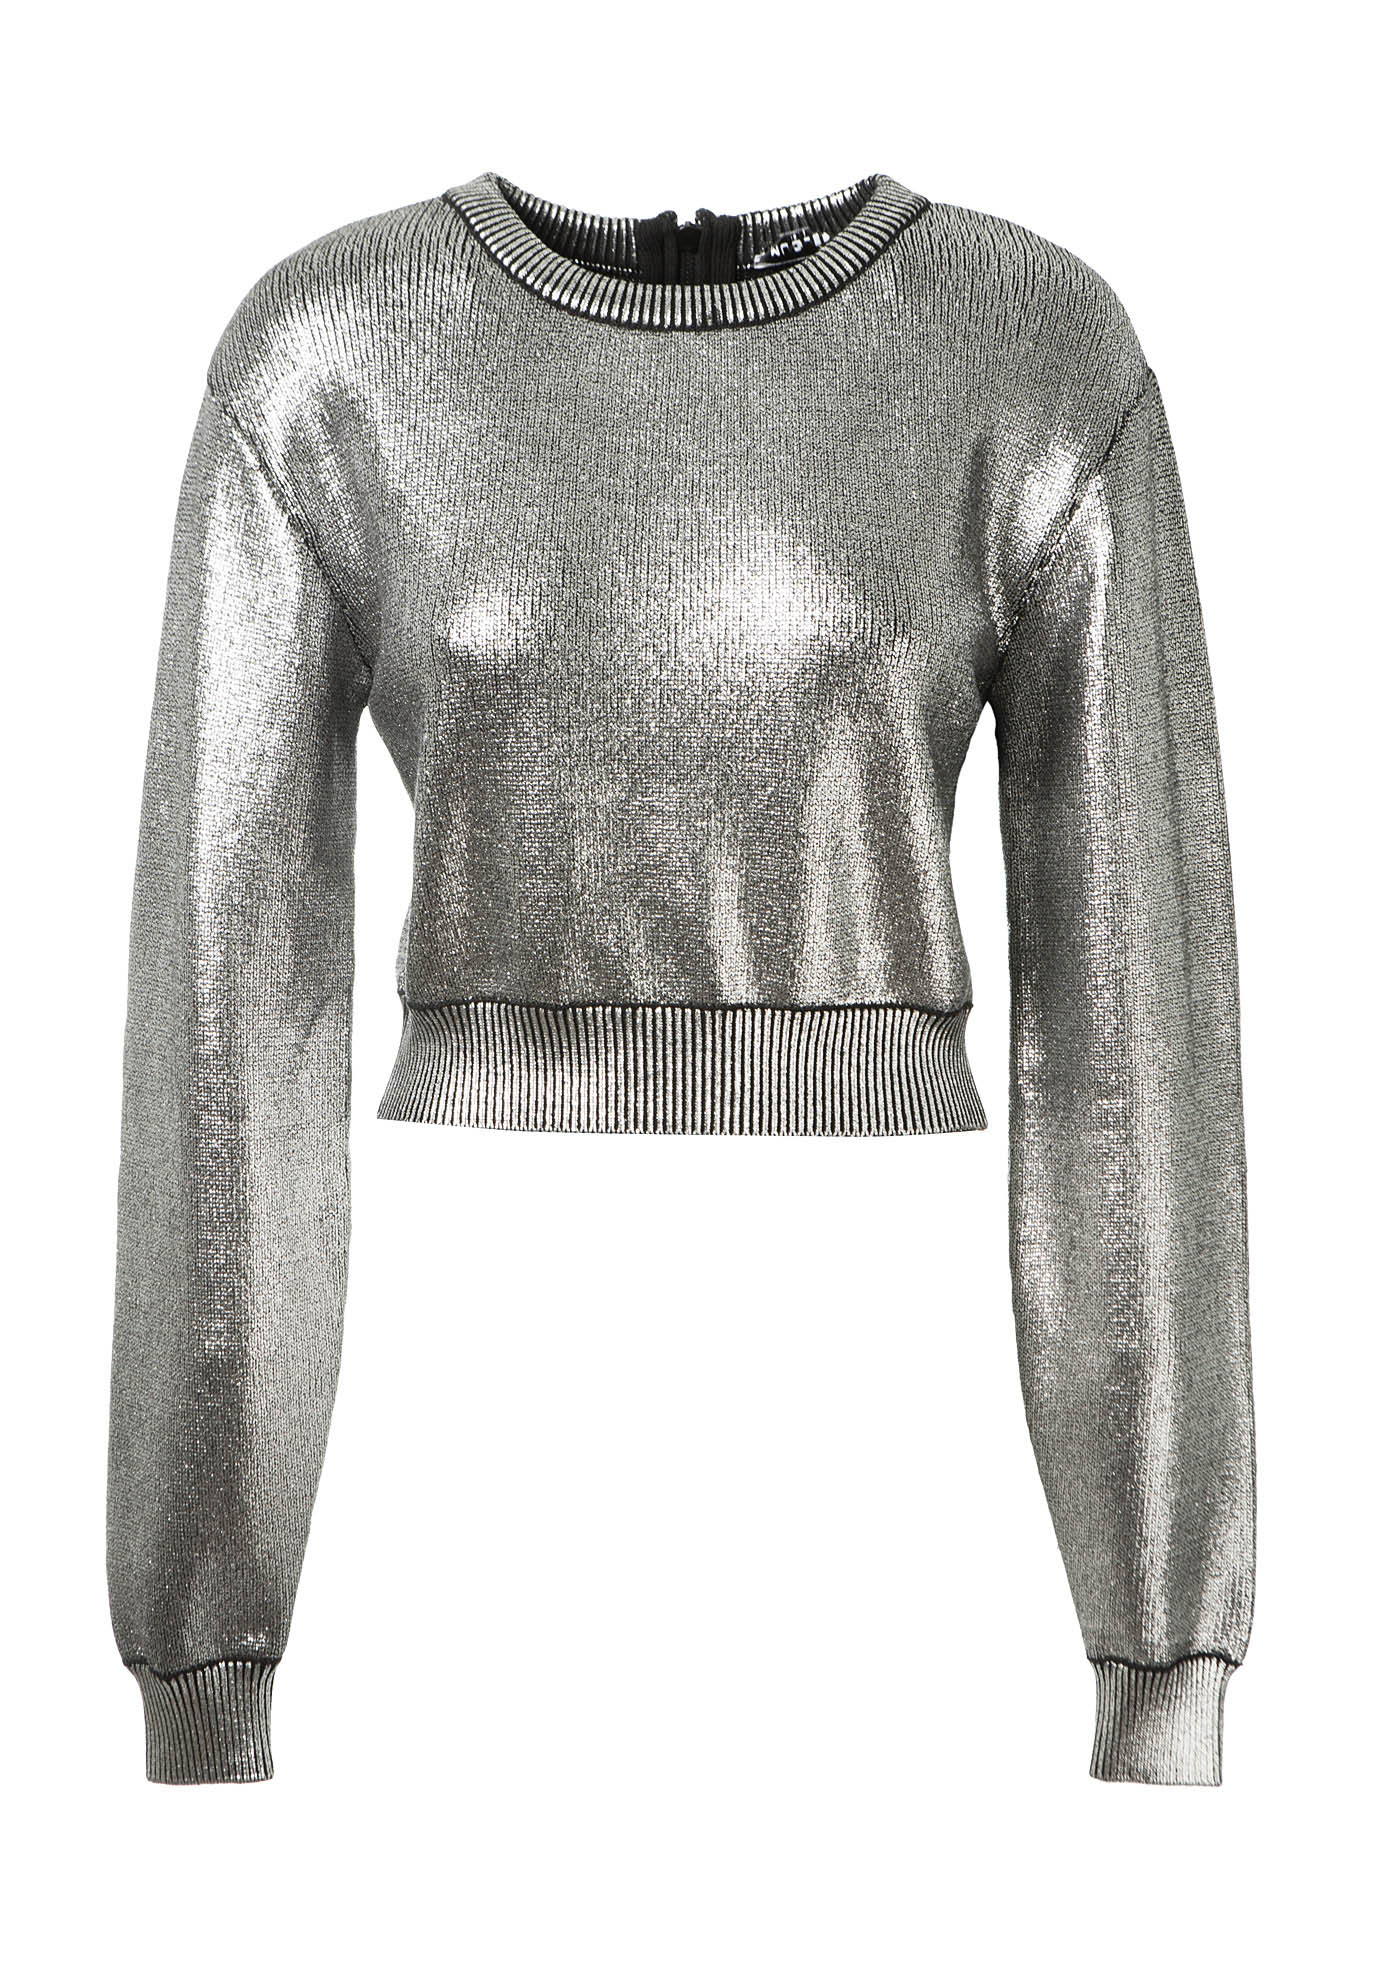 Mugler Silver Coated Cotton Cropped Sweater | ModeSens